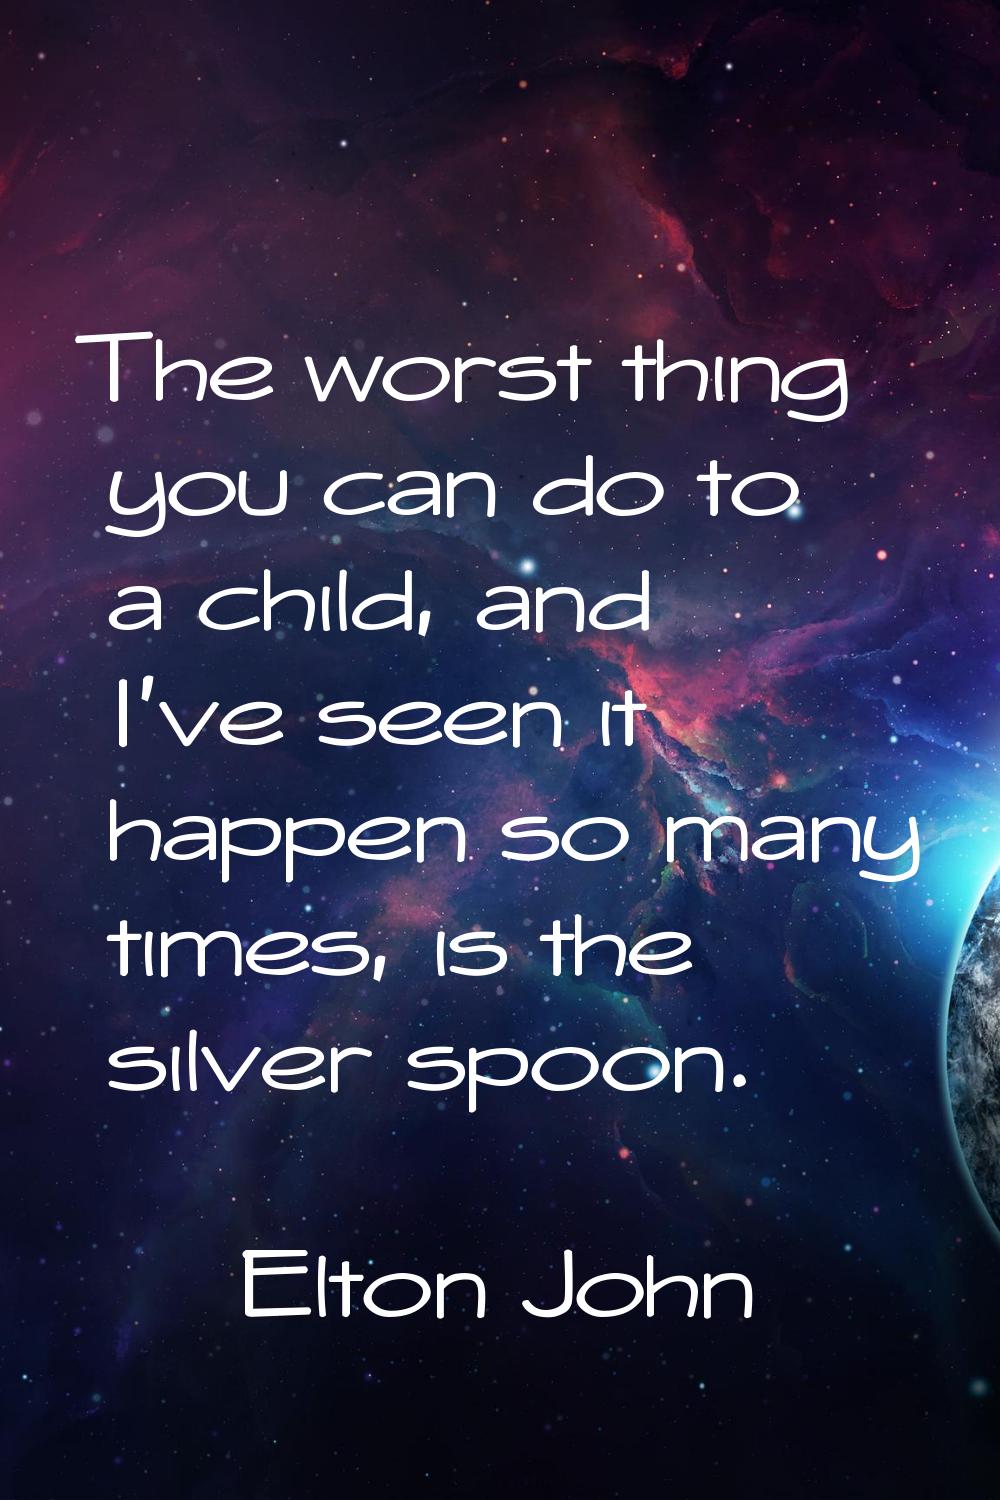 The worst thing you can do to a child, and I've seen it happen so many times, is the silver spoon.